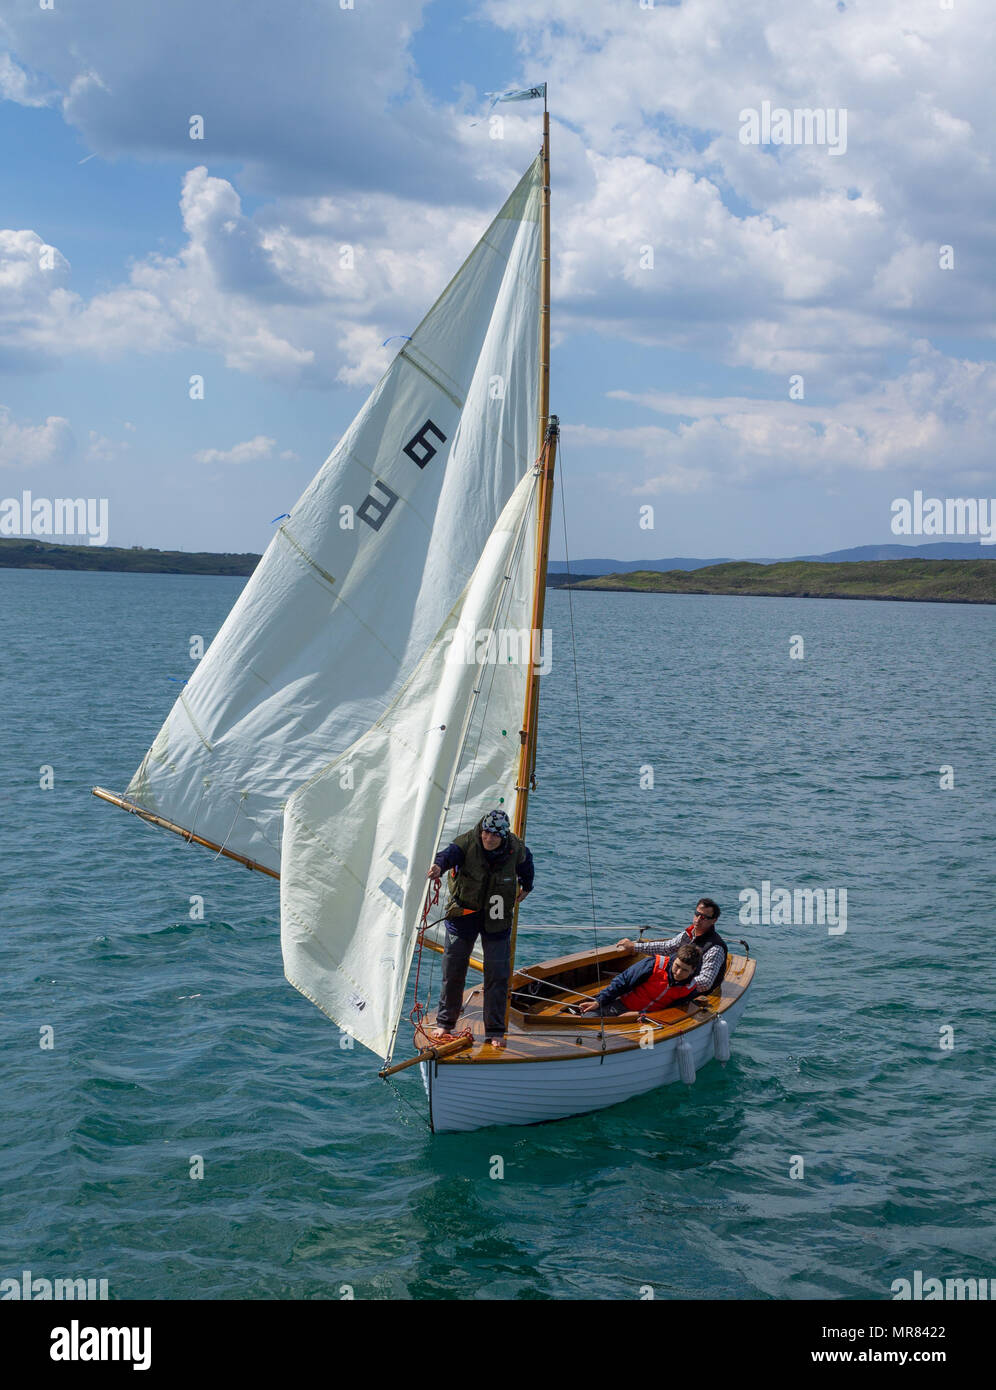 clinker built wooden sailing dinghy or boat being sailed in Baltimore harbour, Ireland by a couple enjoying the summer weather. Stock Photo